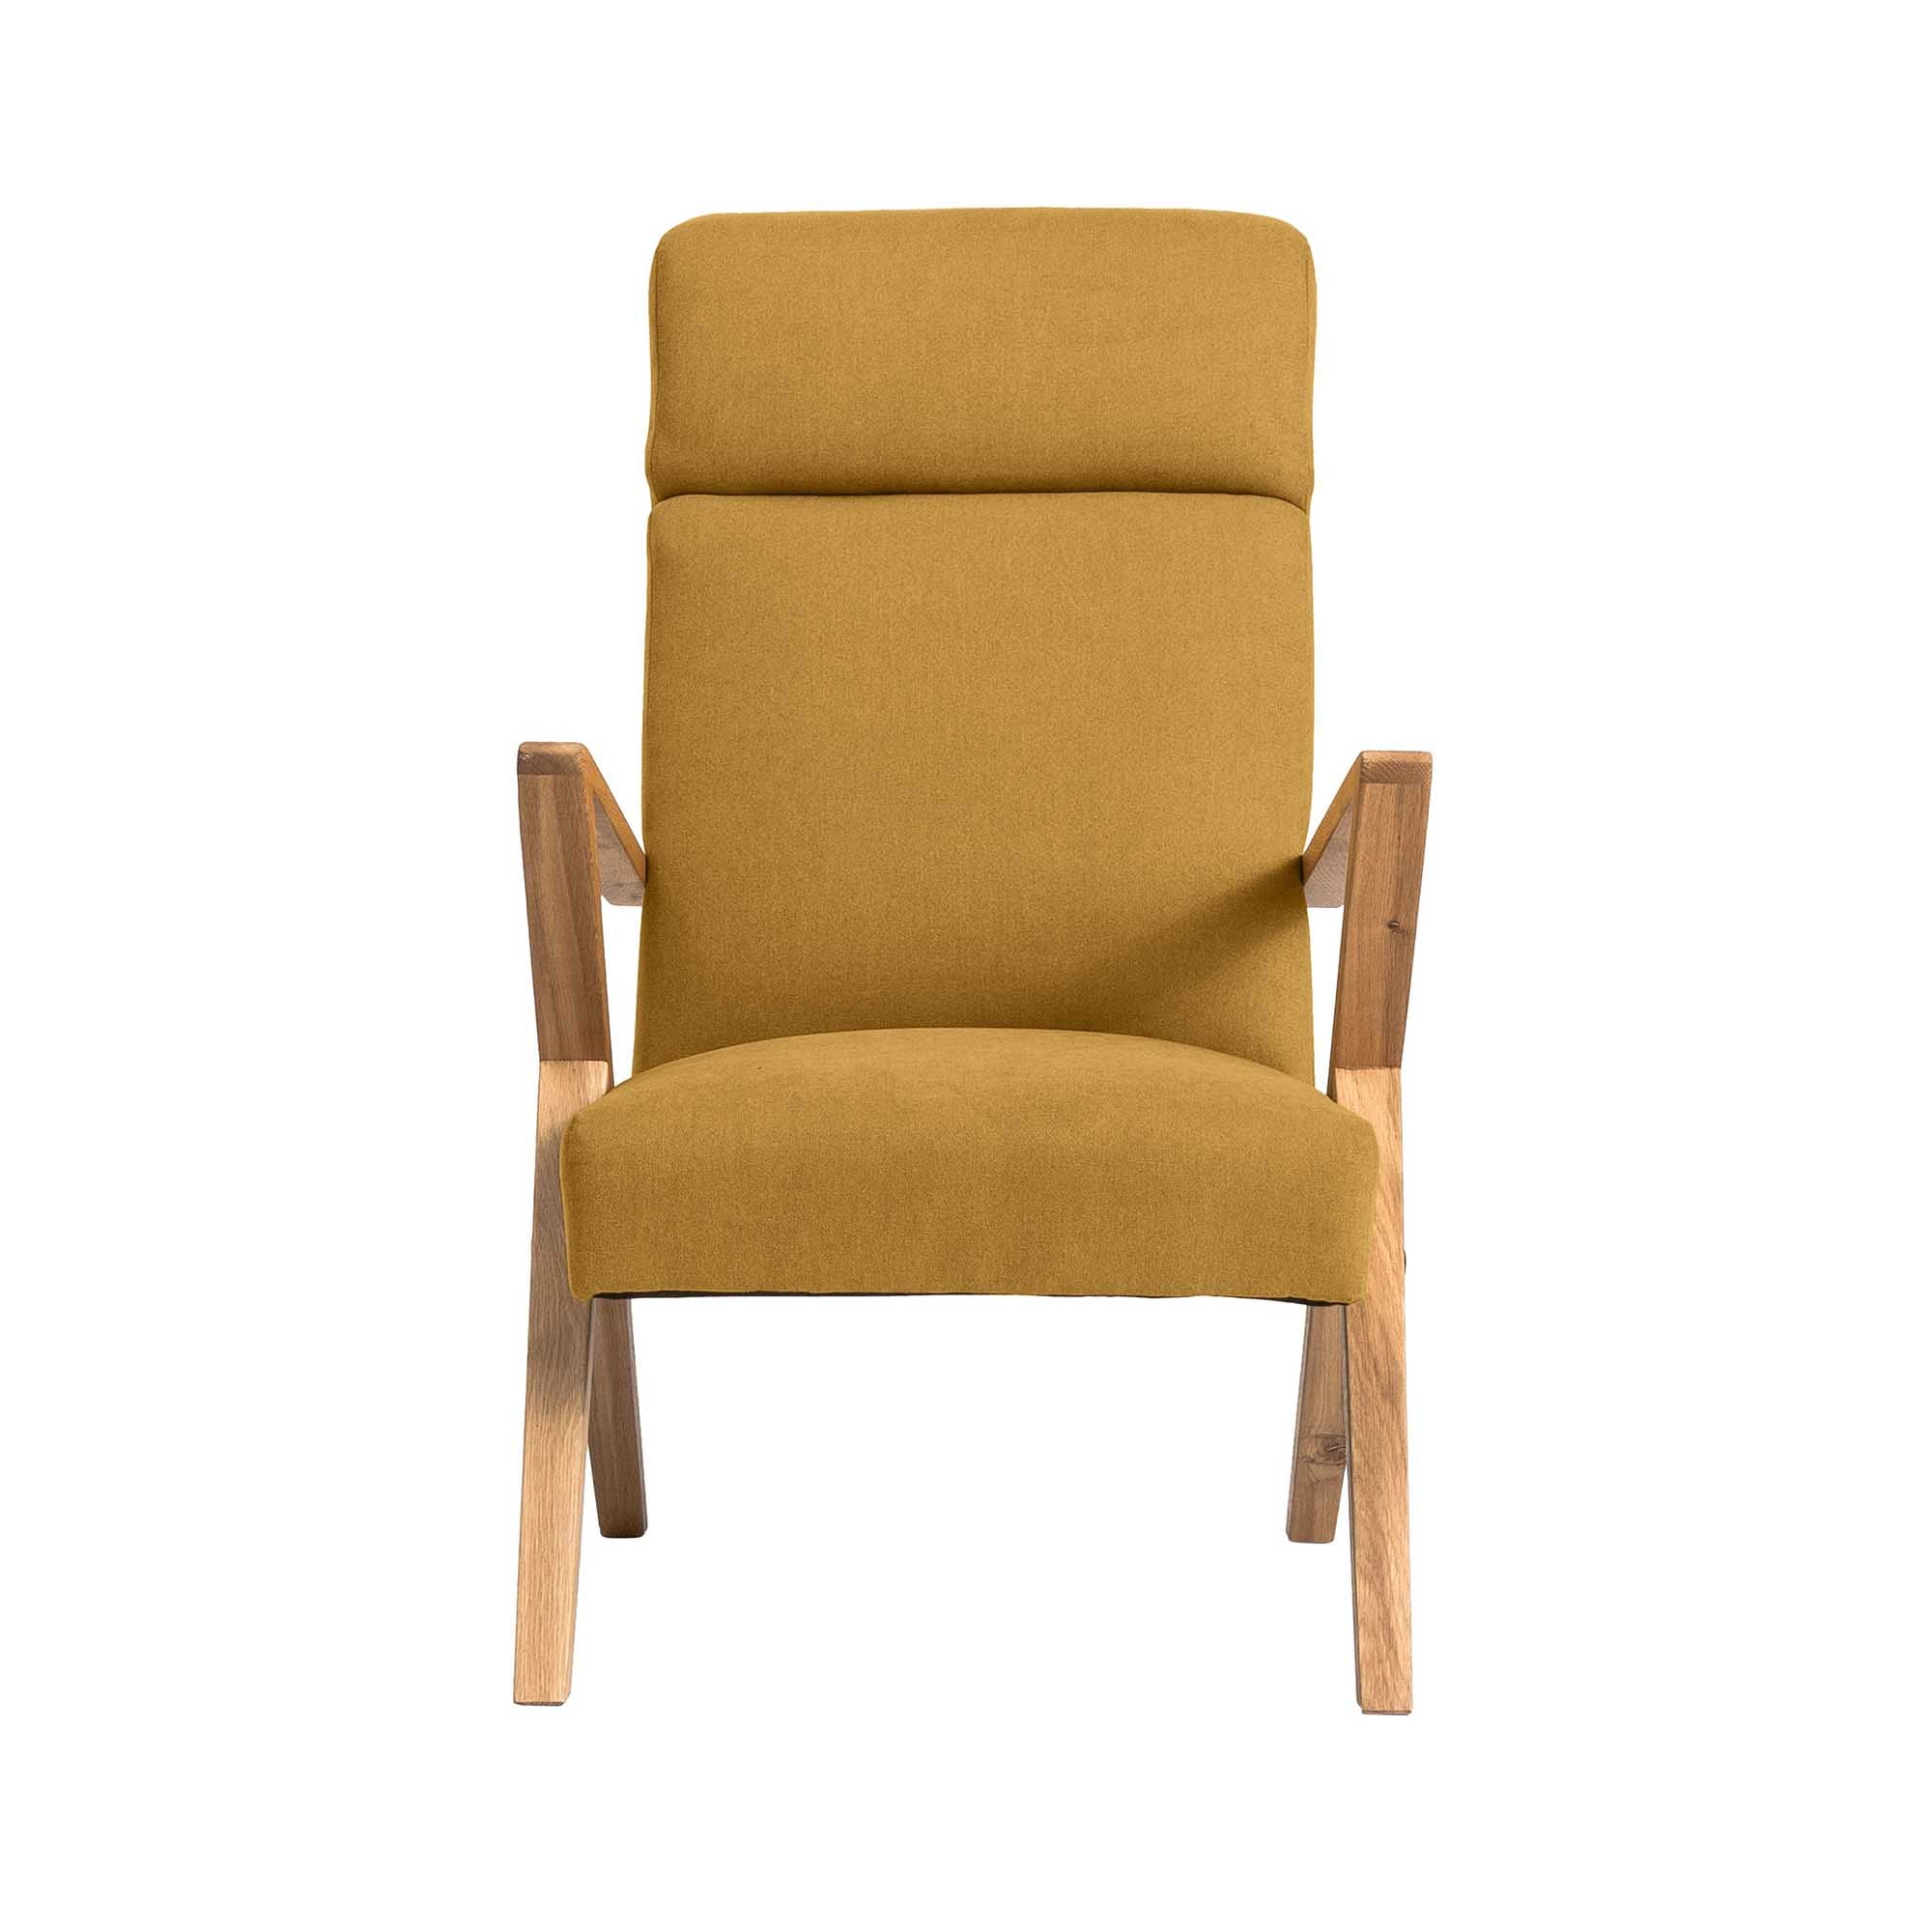 Lounge Chair, Oak Wood Frame, Natural Colour yellow fabric, front view